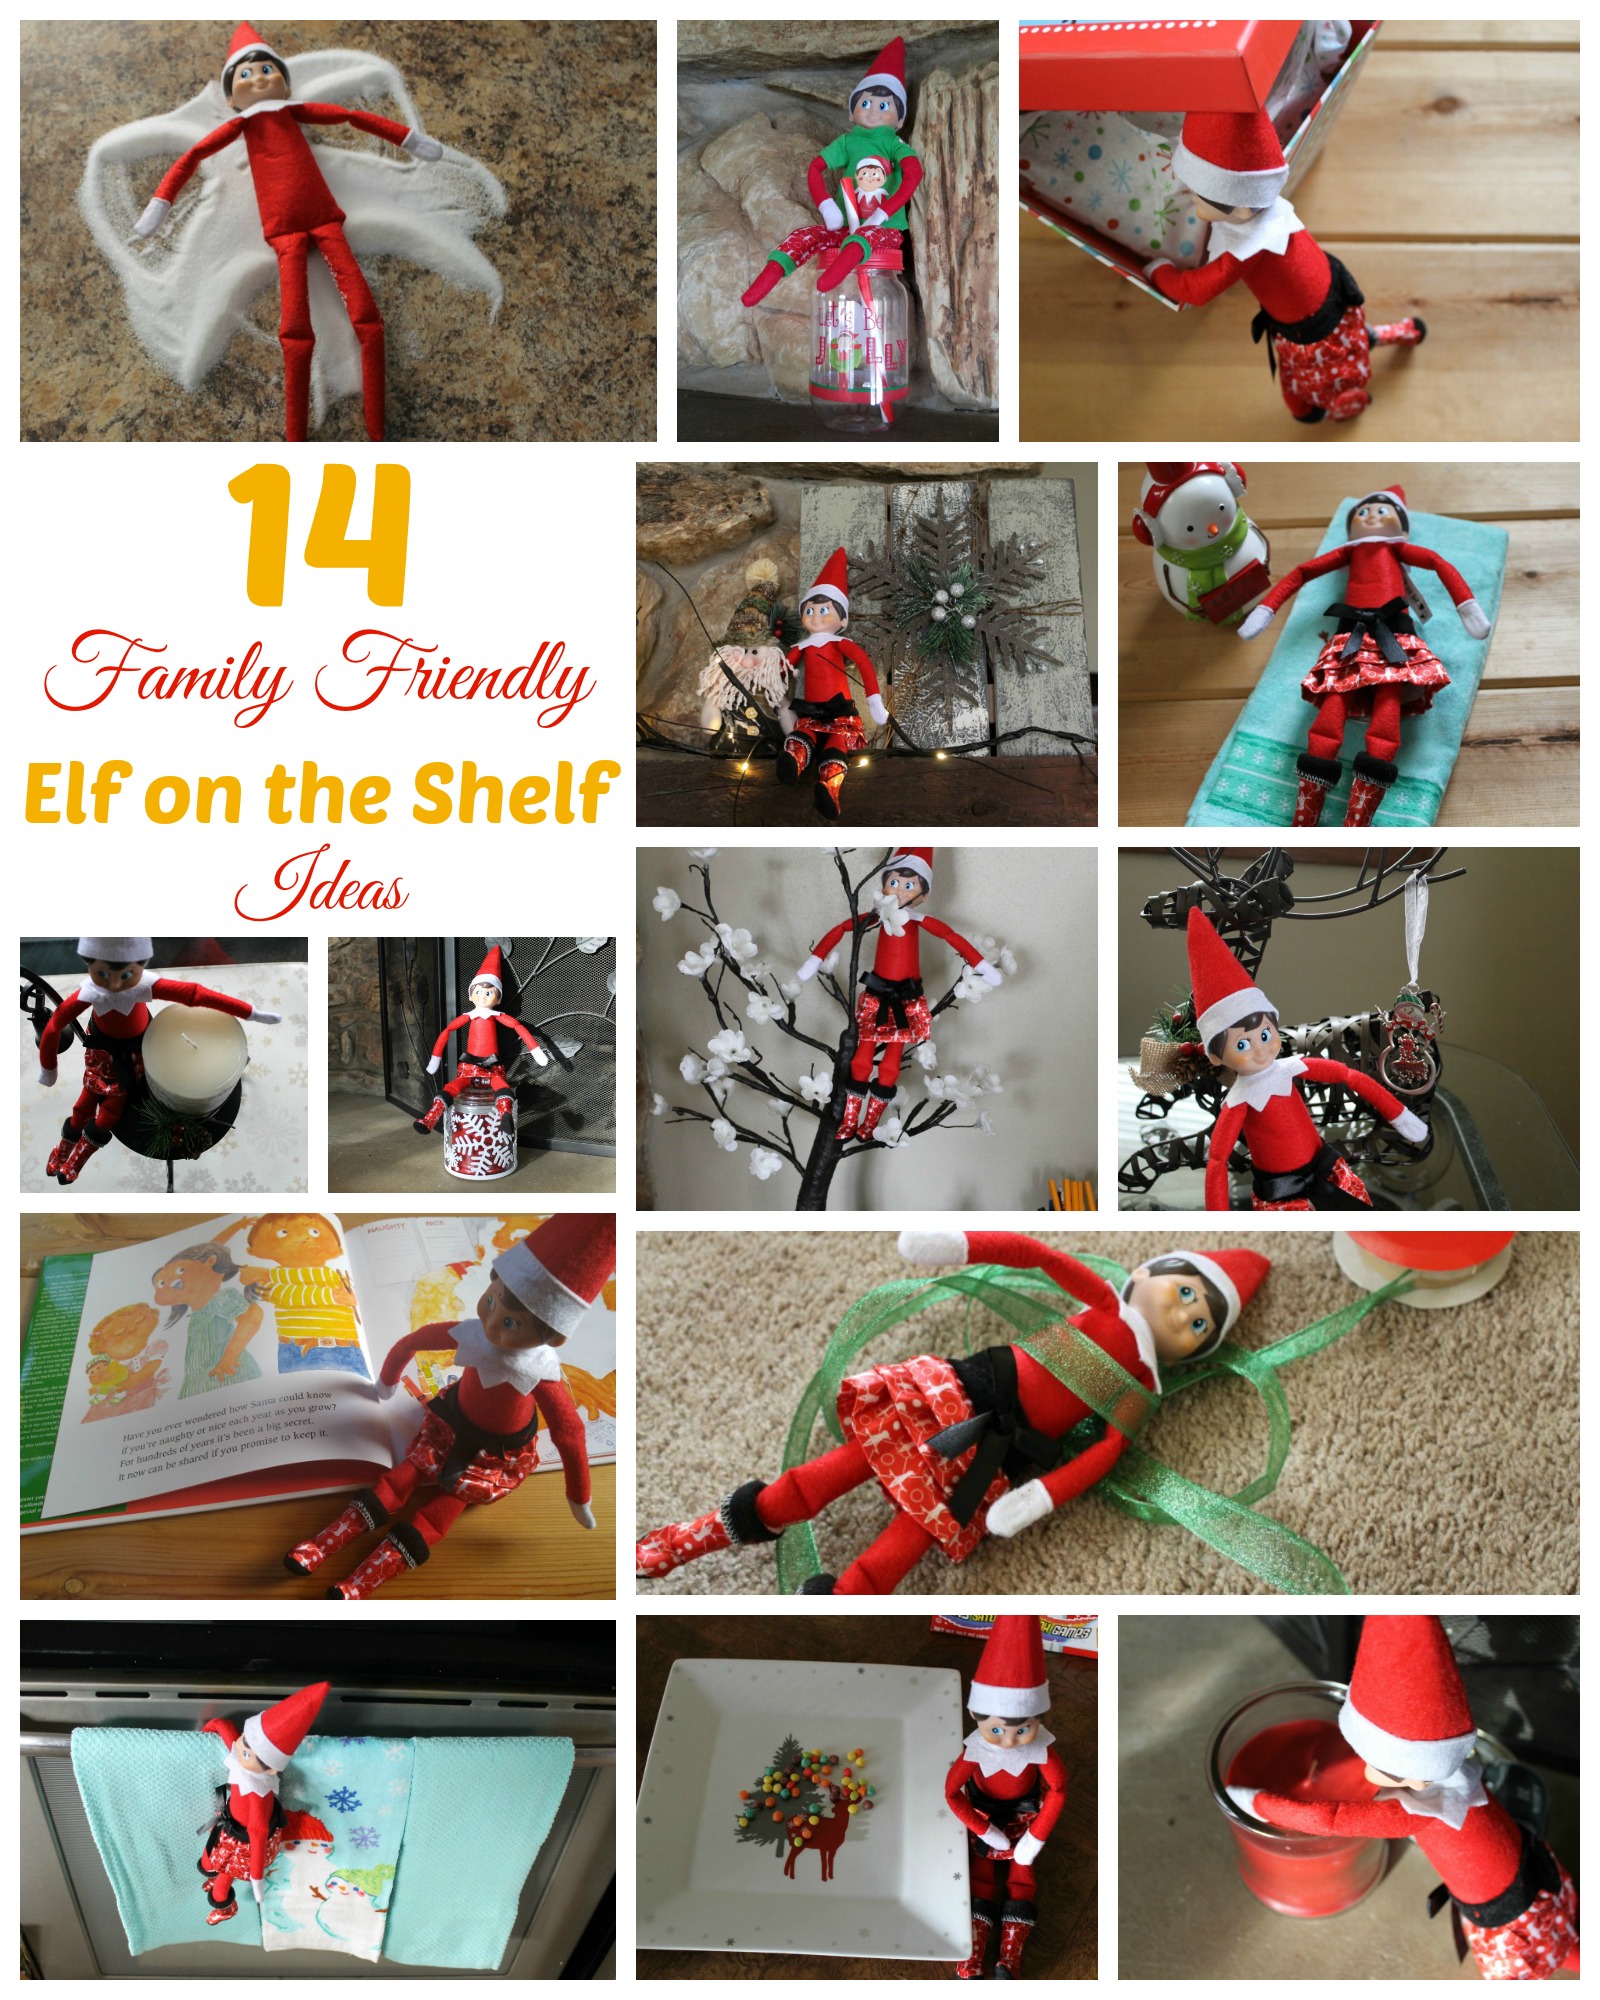 14 Family Friendly Elf on the Shelf Ideas - Outnumbered 3 to 1